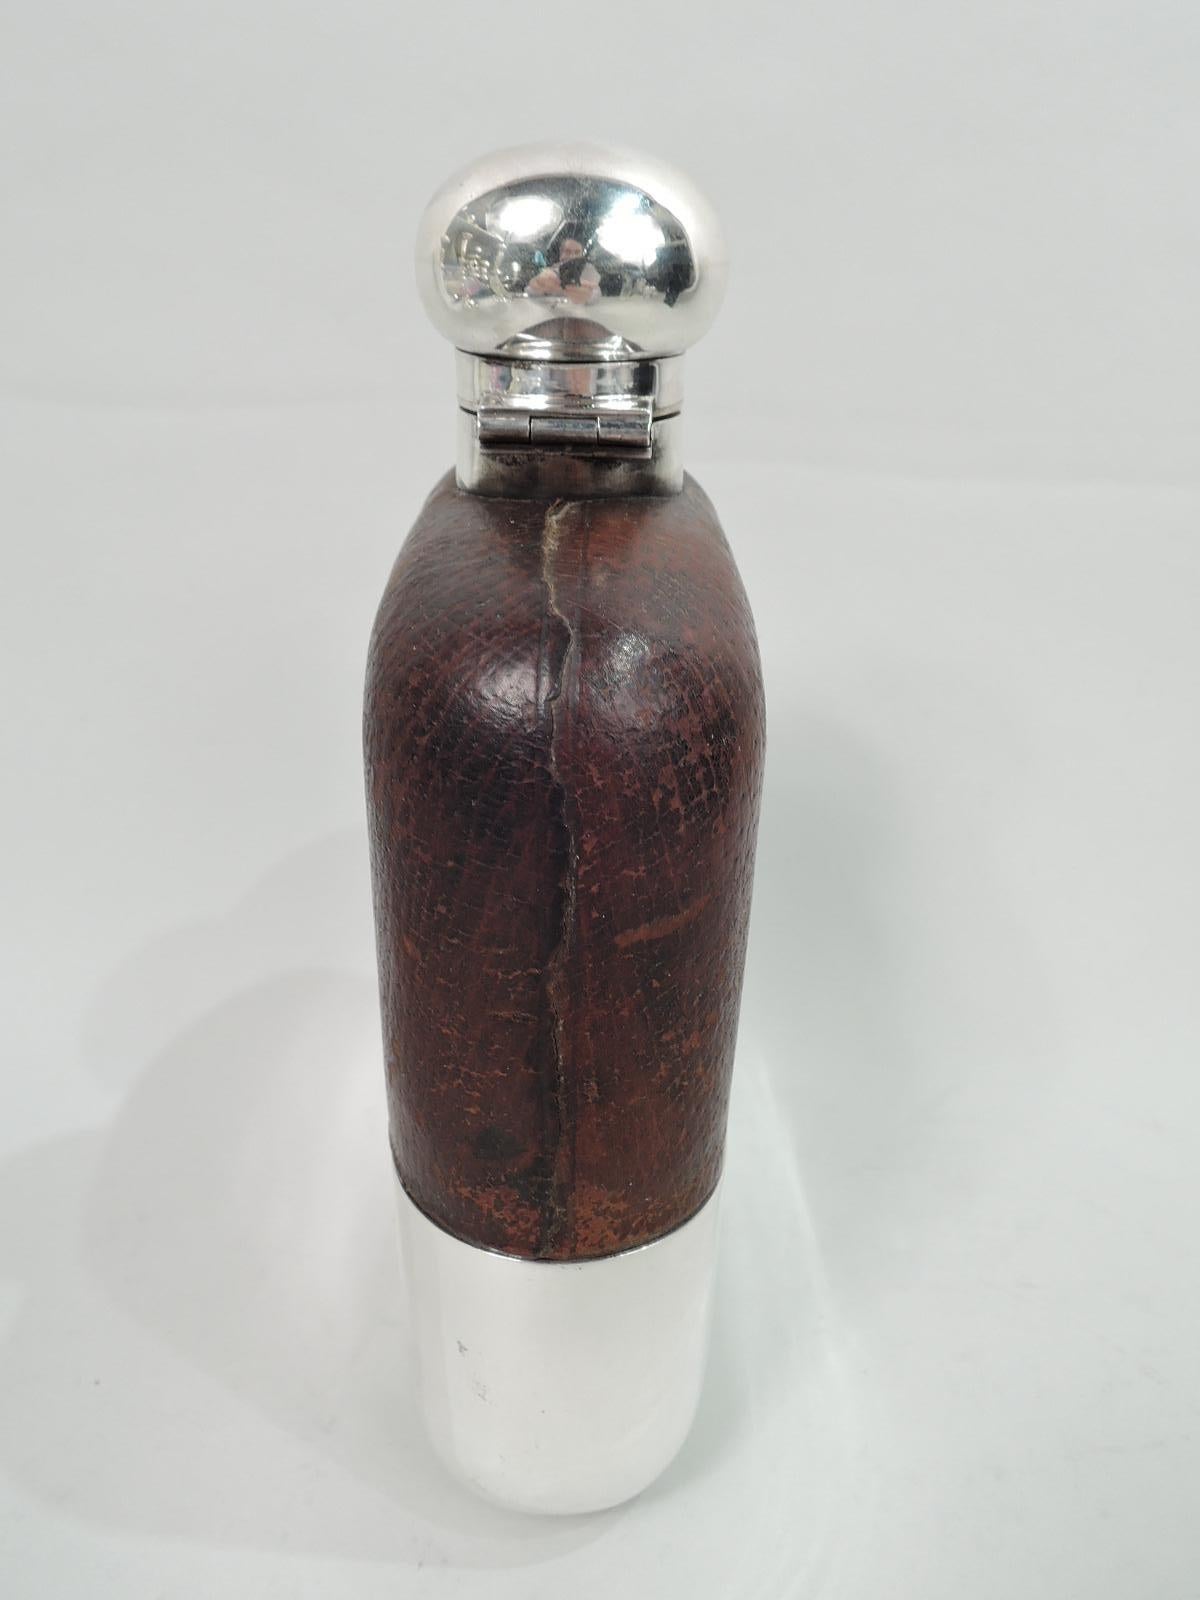 George V safari flask. Made by James Dixon & Sons in Sheffield in 1927. Clear glass body. Top half encased in leather with cutout tubular windows. Bottom half has detachable sterling silver cup. Short straight sterling silver neck with hinged and